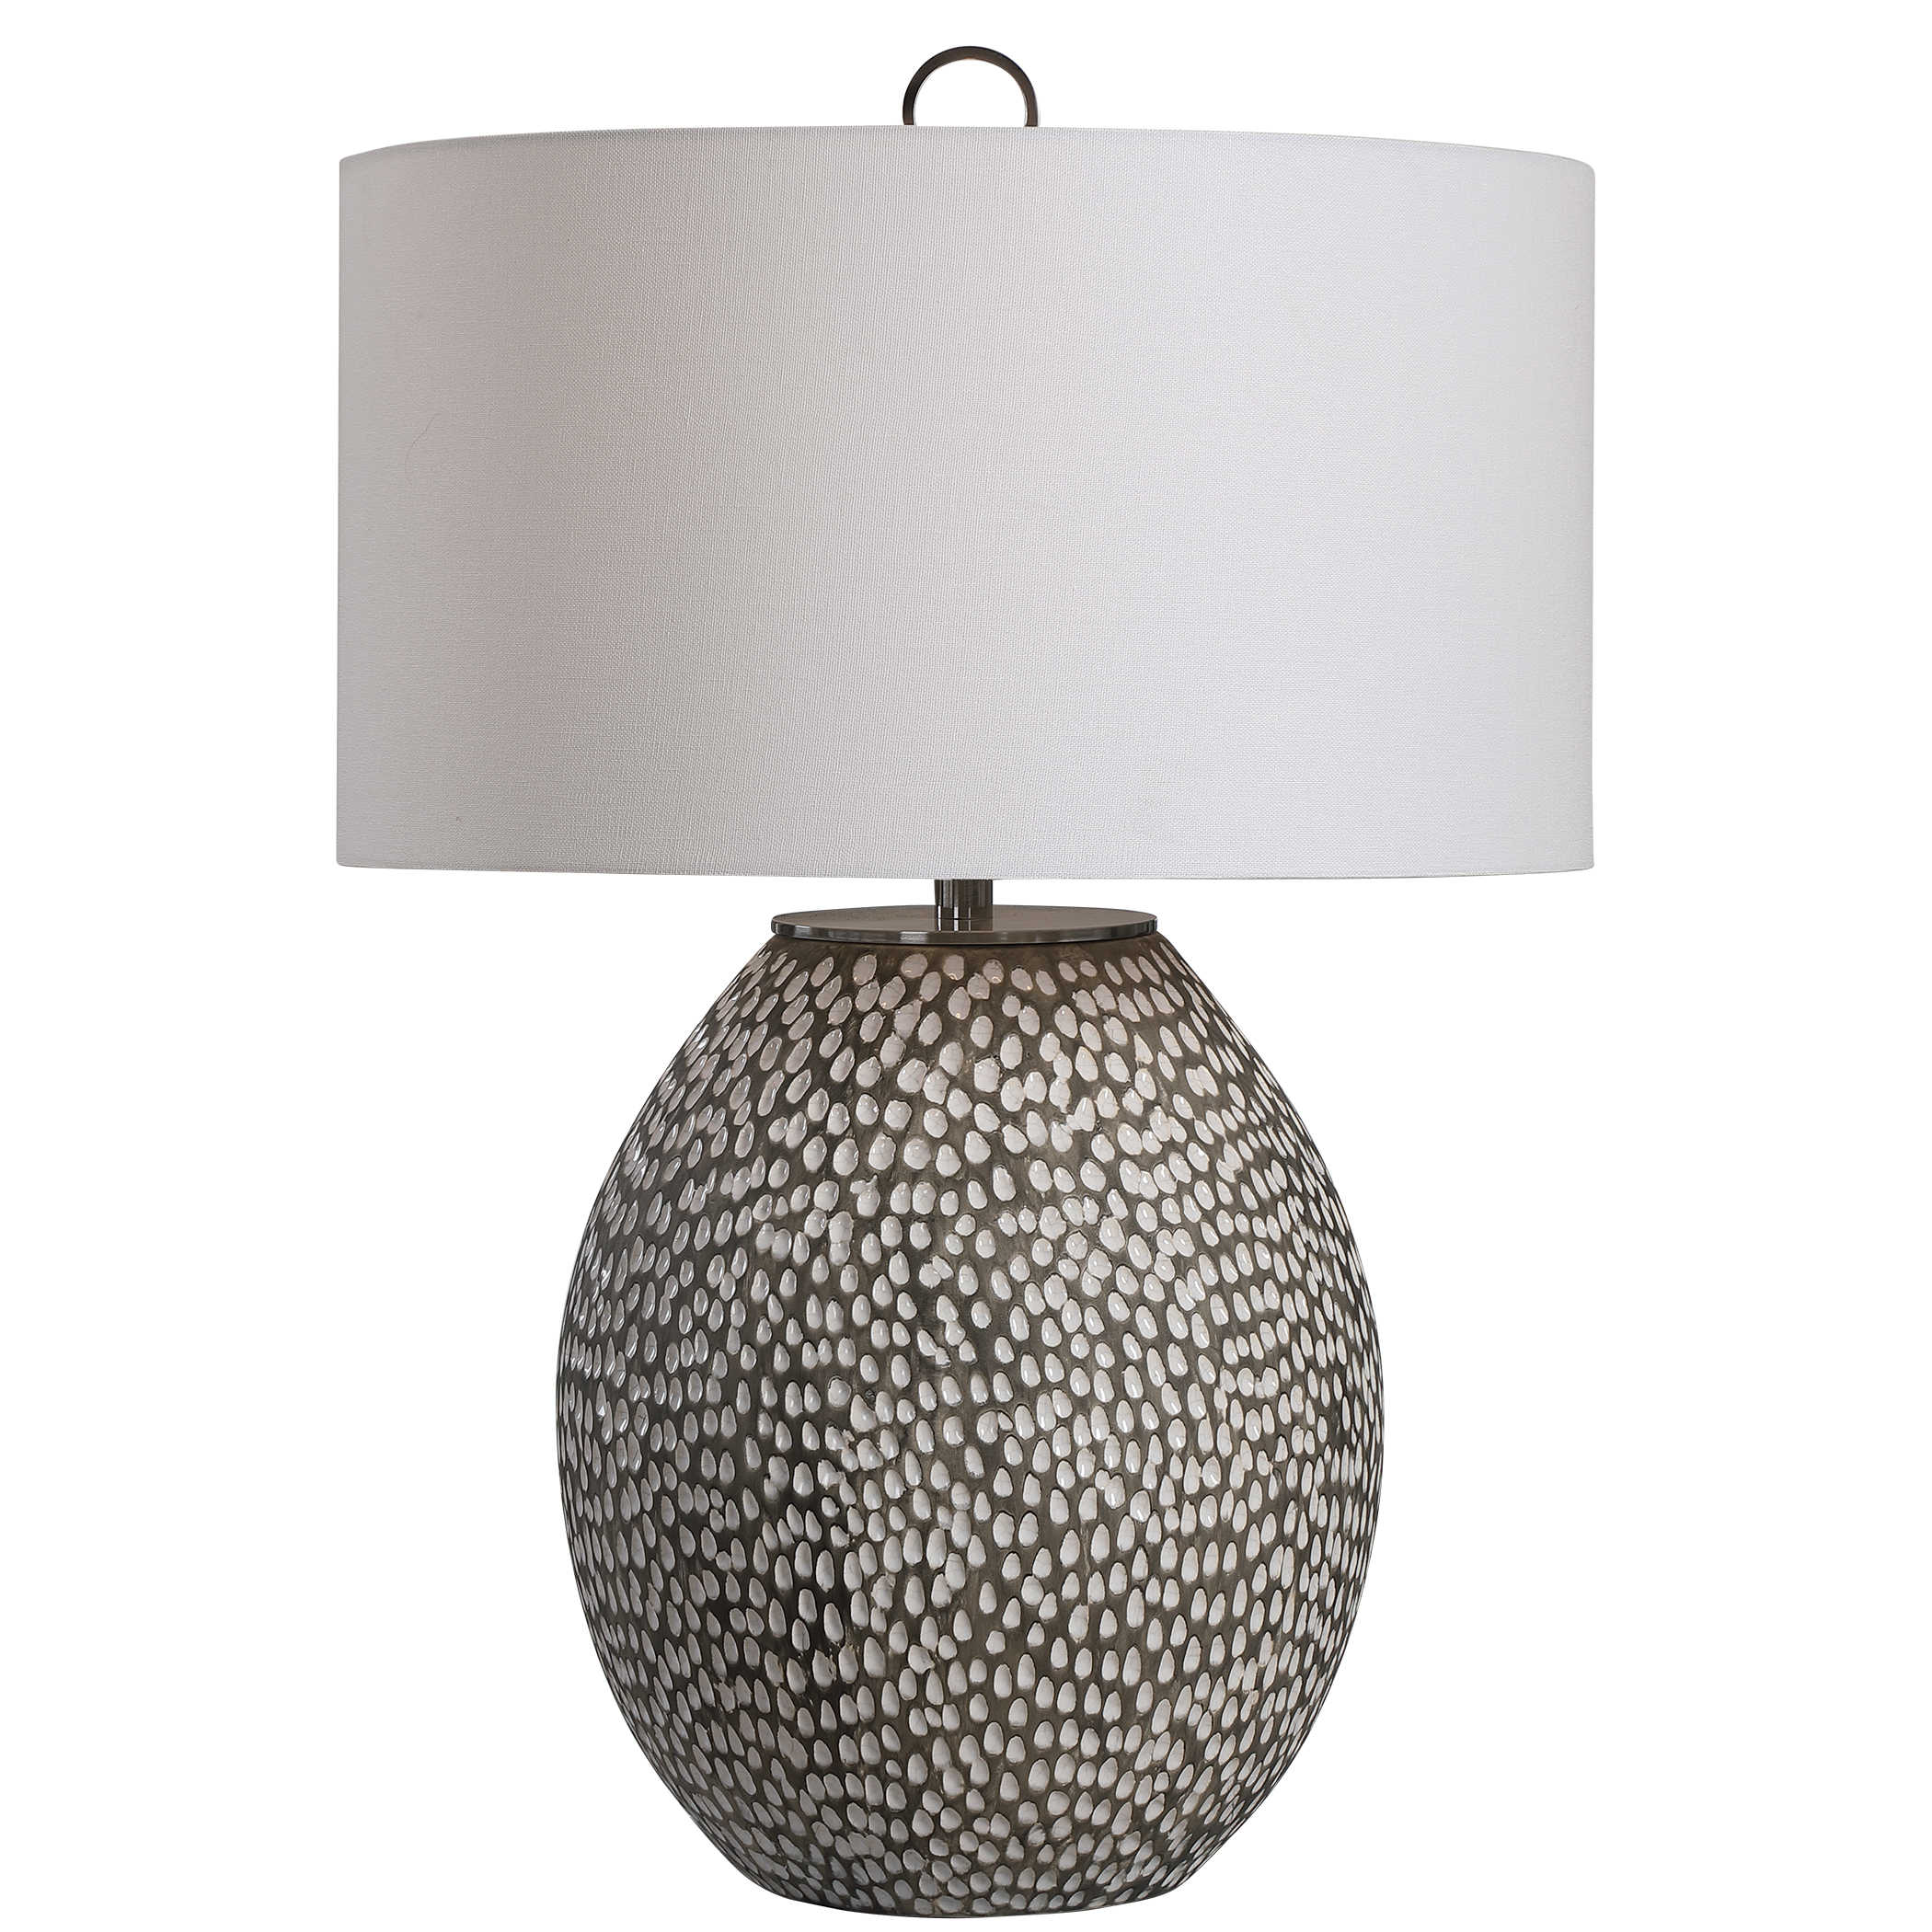 Cyprien Table Lamp By Uttermost, Uttermost Table Lamps Uk